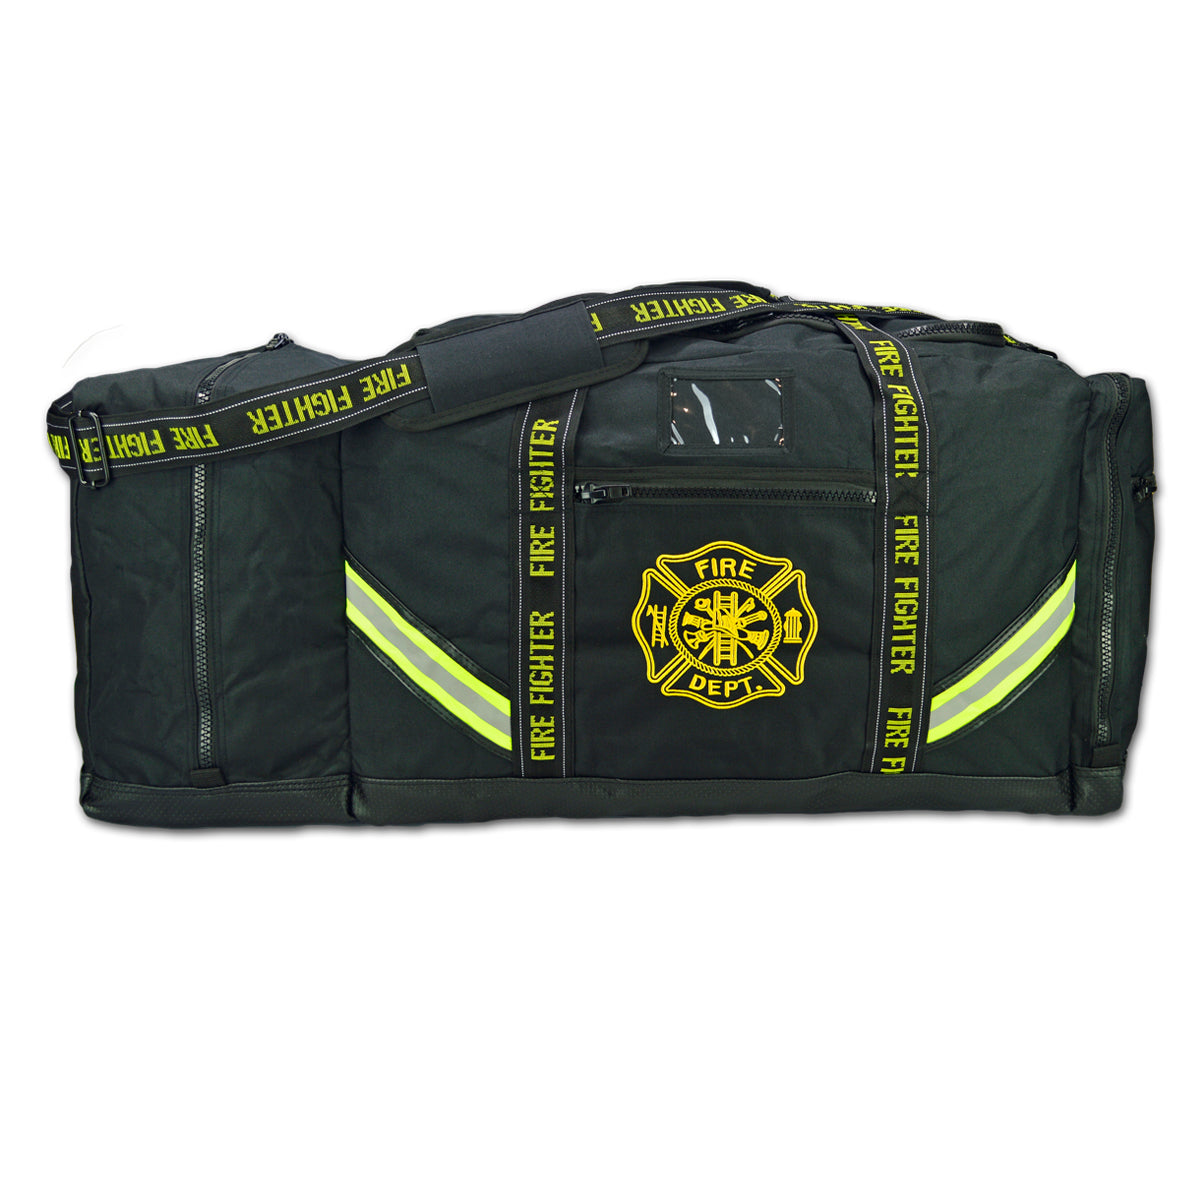 Rolling Step-In Turnout Gear Bag w/ Wheels & Helmet Compartment